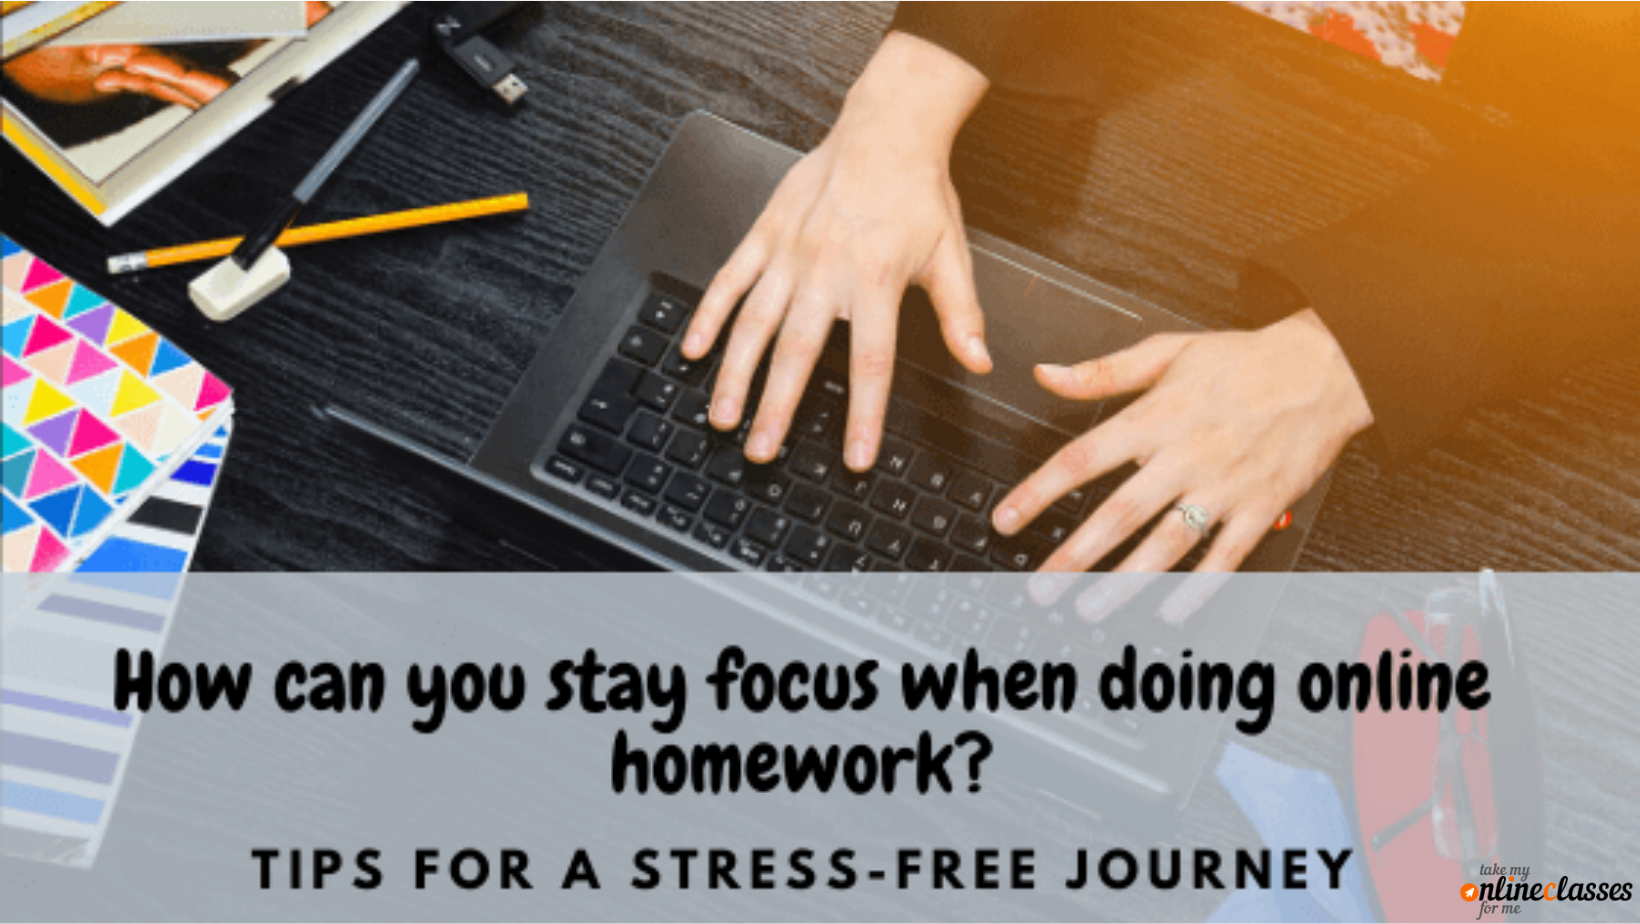 How can you stay focus when doing online homework